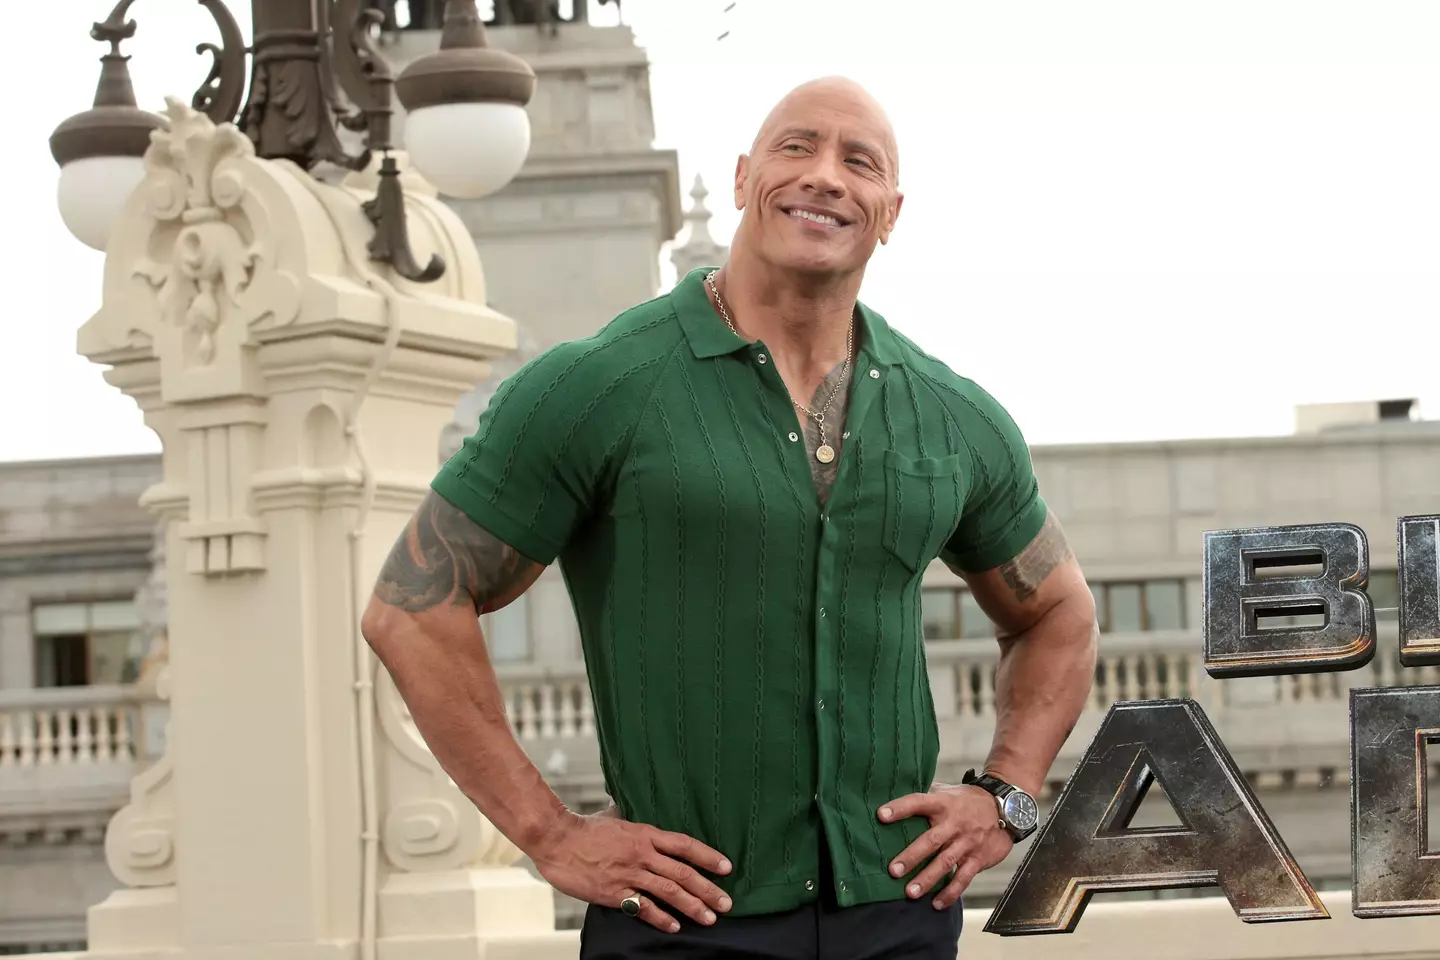 Dwayne Johnson has revealed the diet plan stems from his father.